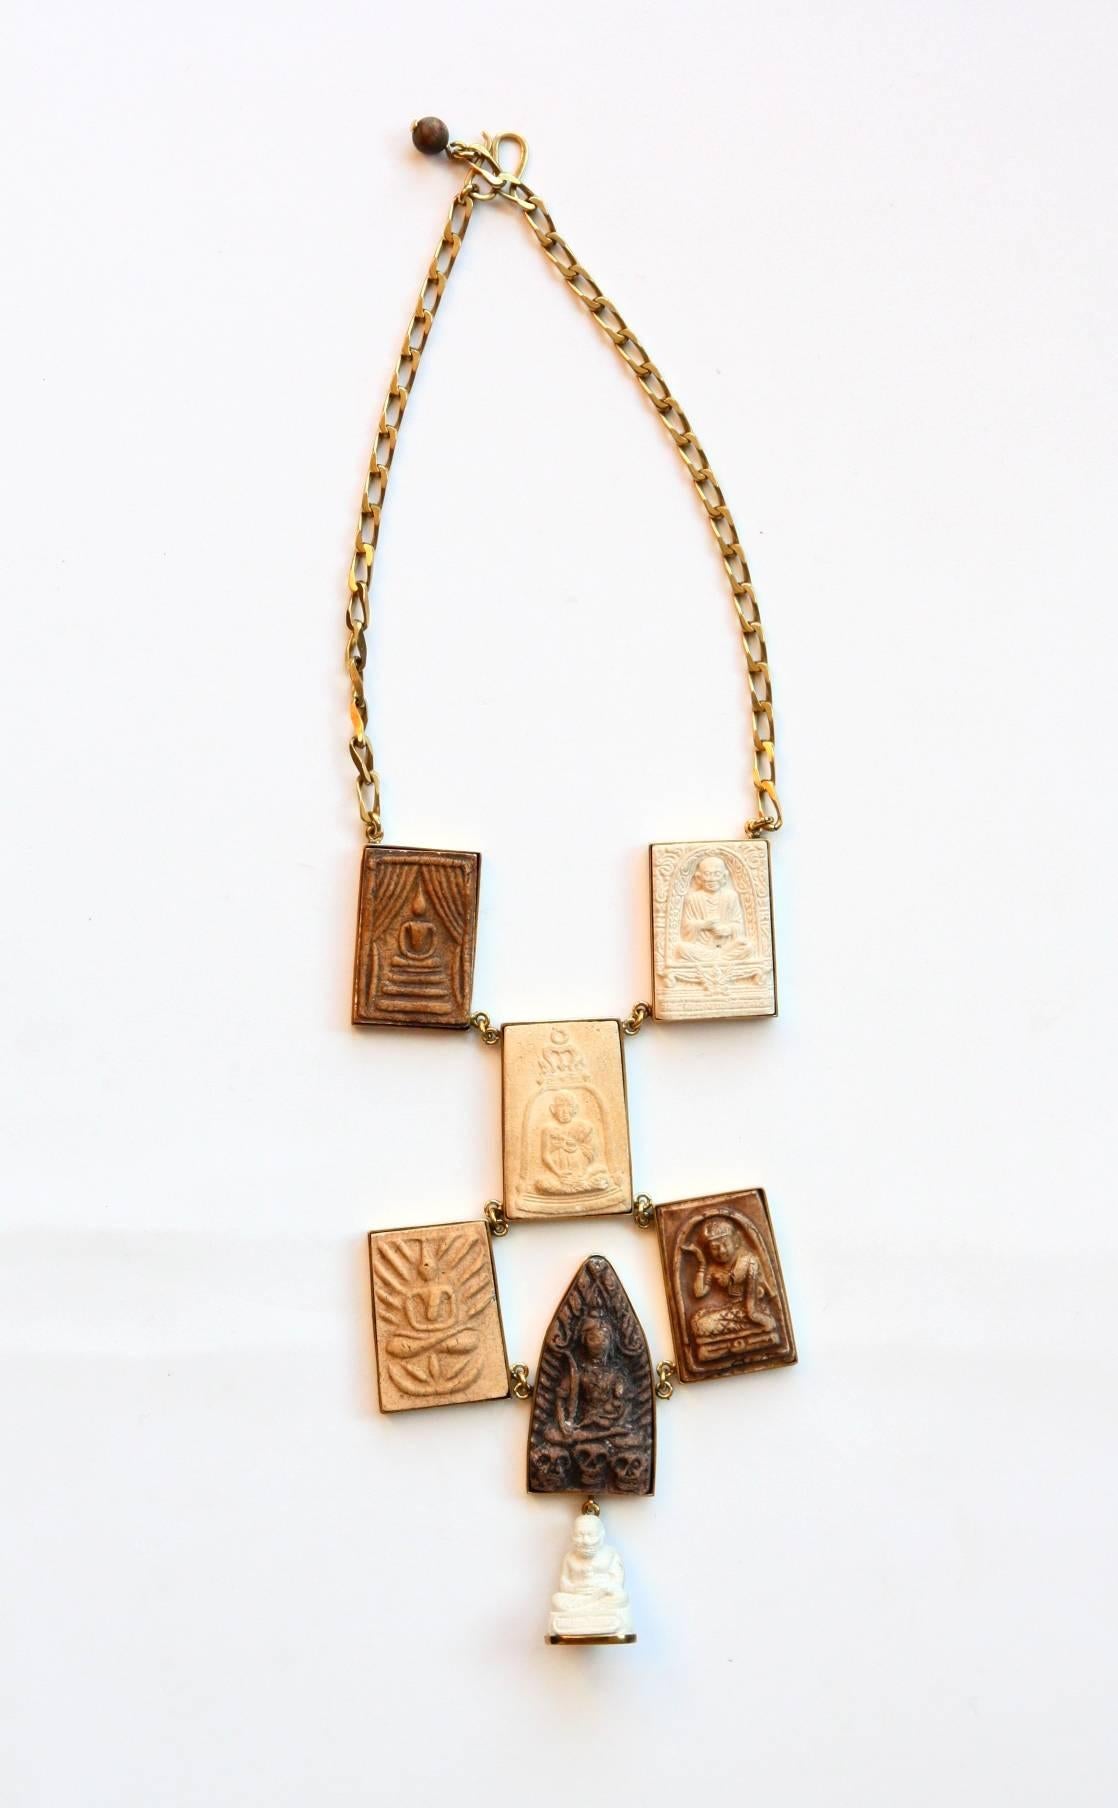 Antiques buddha terracotta amulets with buddha different shape, bronze linked adjustable. 
All Giulia Colussi jewelry is new and has never been previously owned or worn. Each item will arrive at your door beautifully gift wrapped in our boxes, put